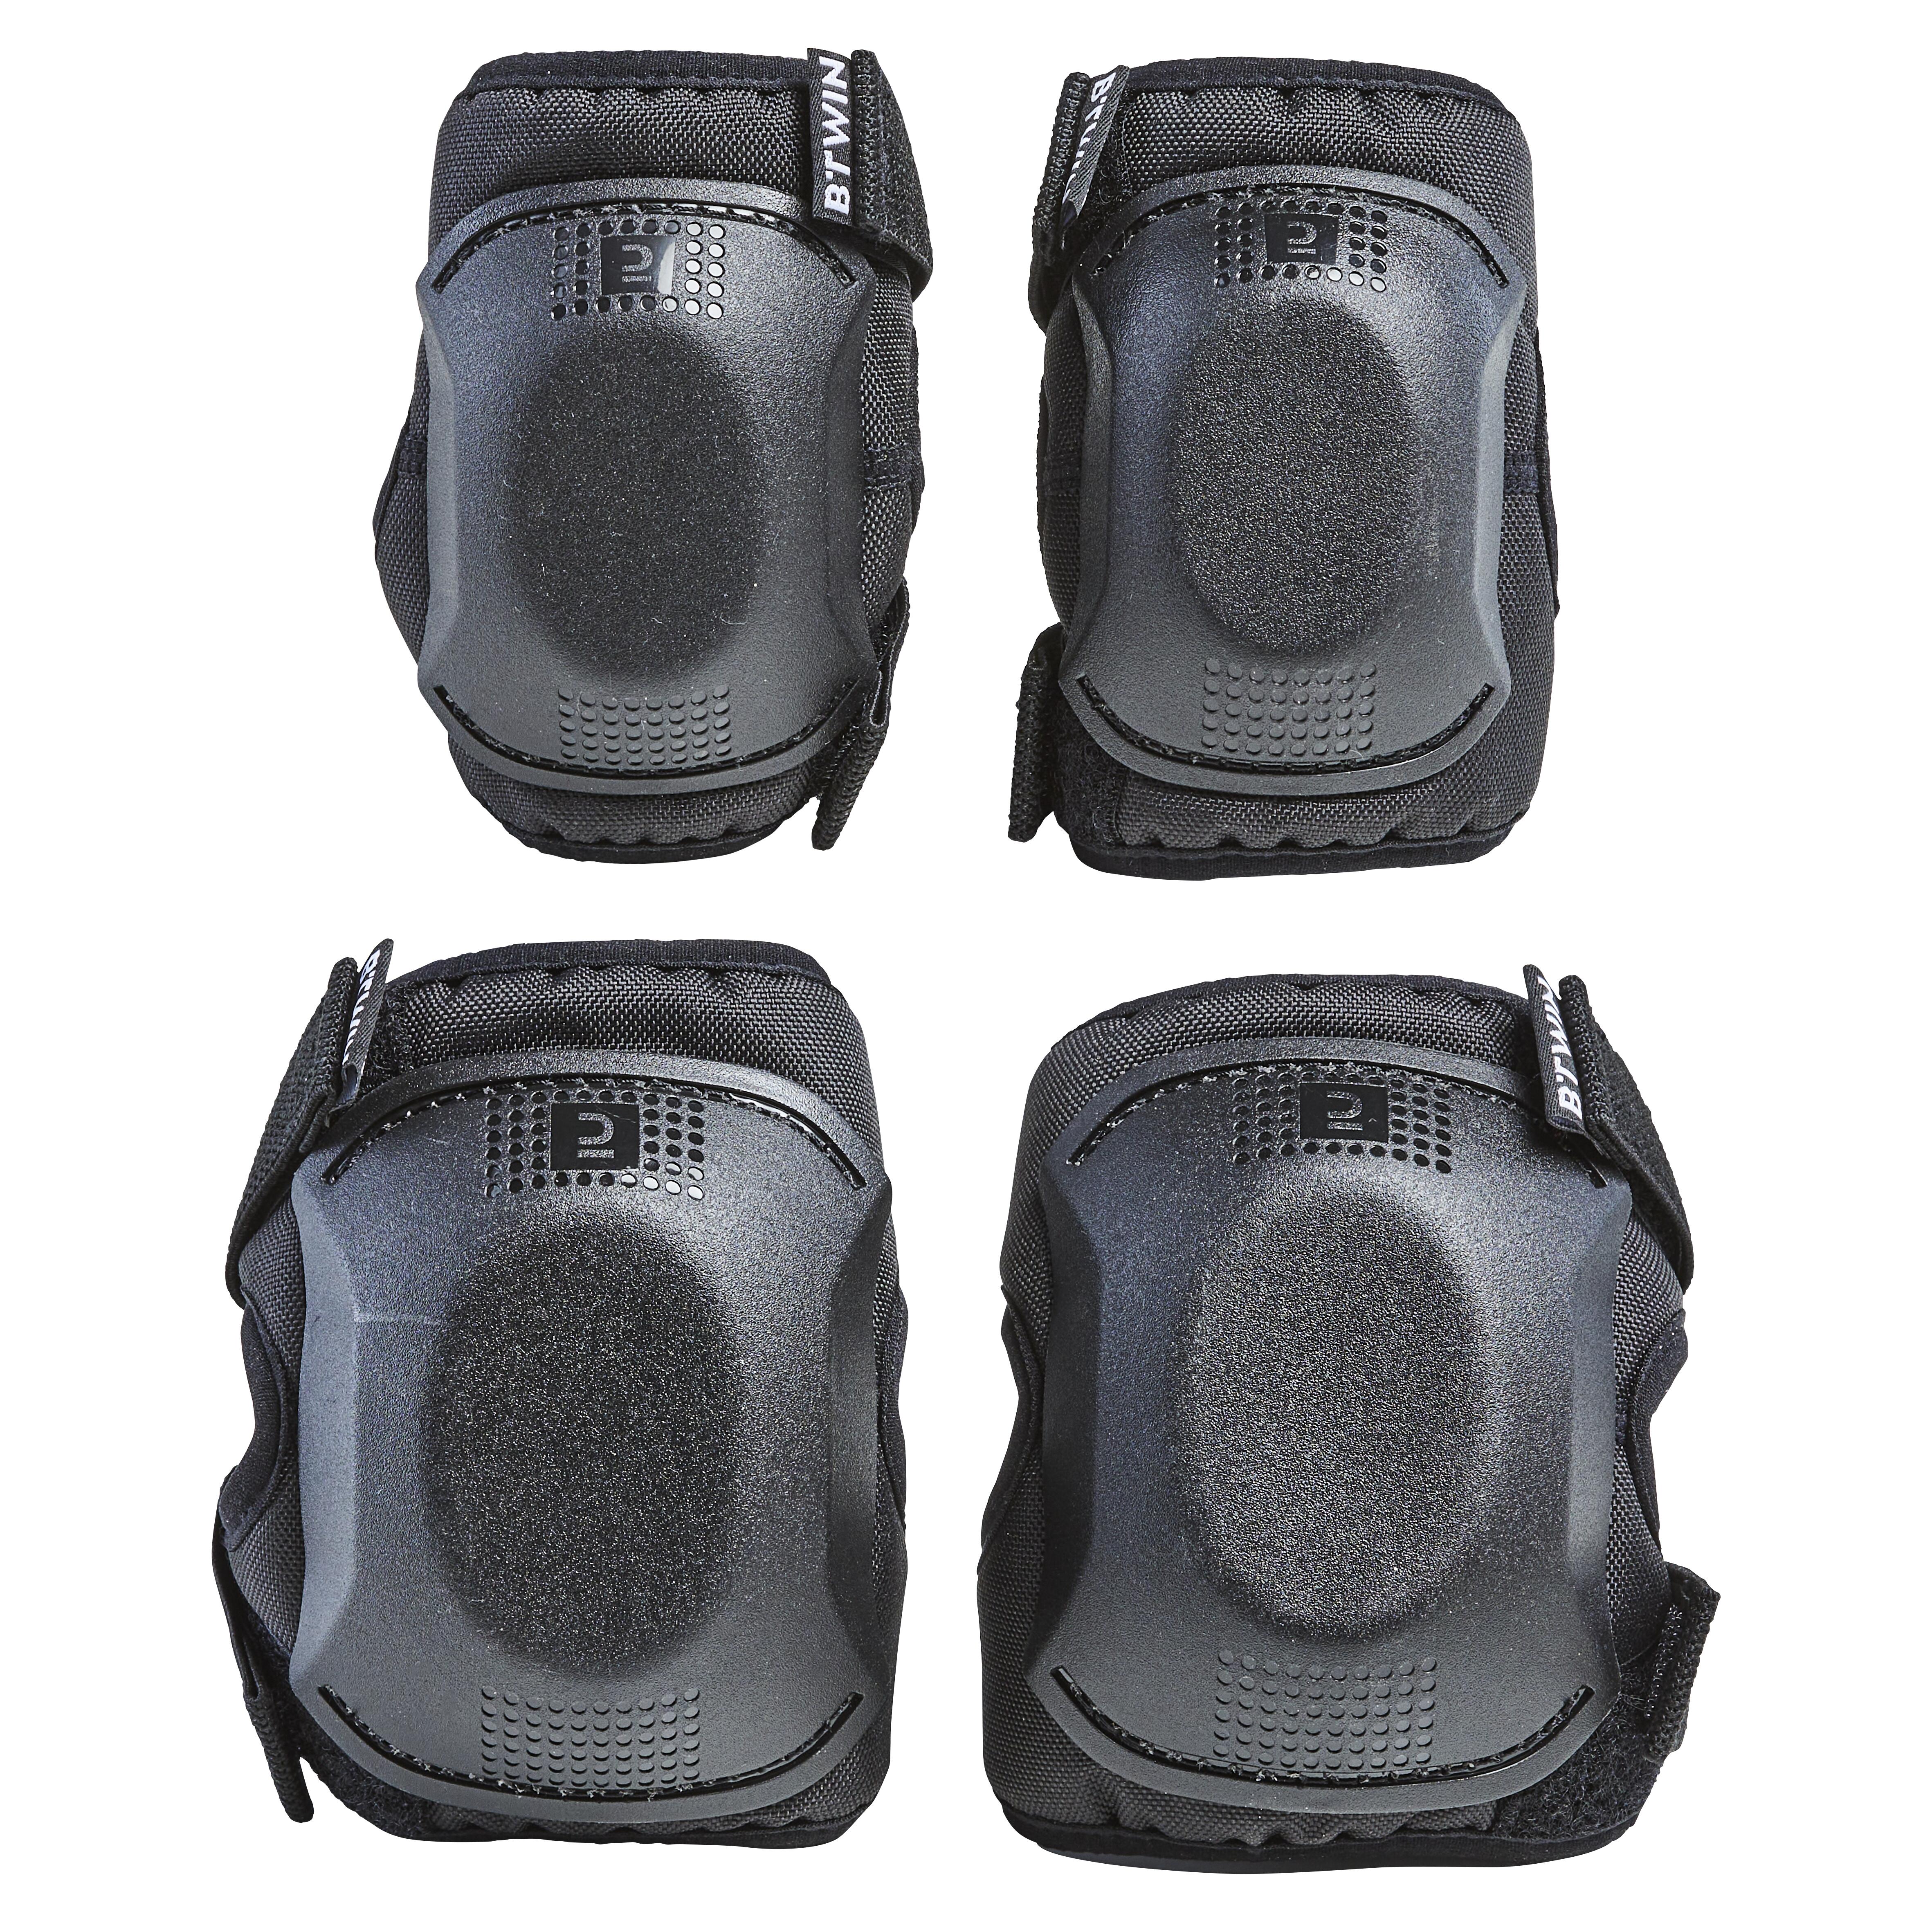 Kids Cycling Elbow & Knee Protection Pads Set - Black